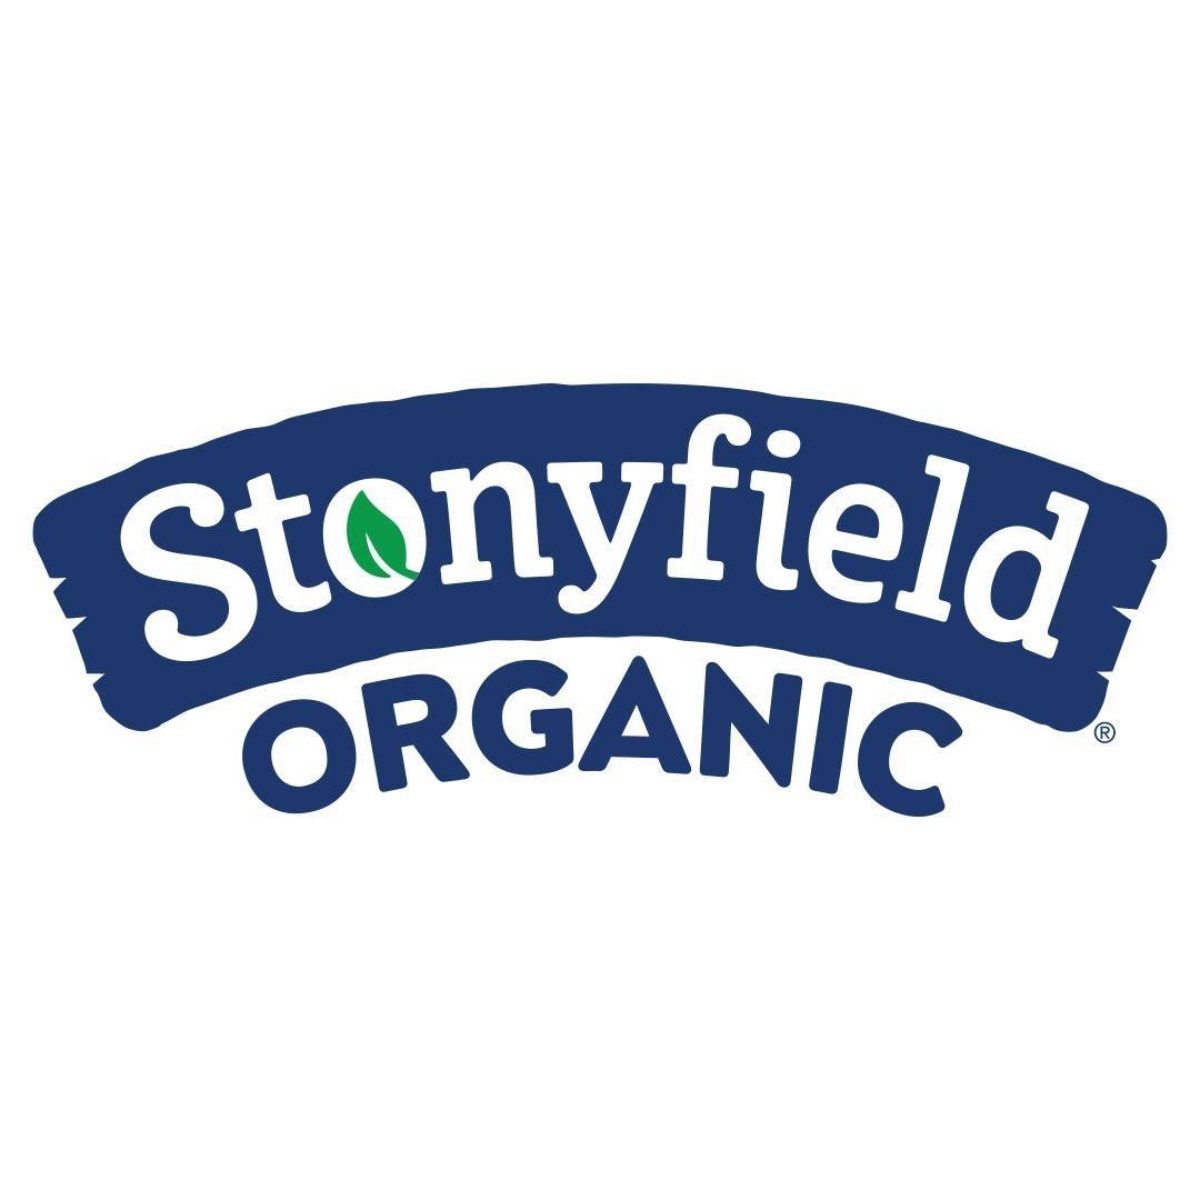 <p><strong><a class="SWhtmlLink" href="https://www.stonyfield.com" rel="noopener">Stonyfield Farm Inc.</a>, Londonderry</strong></p> <p>This famous, organic yogurt brand started as a way to fund a nonprofit organic farming school back in 1983. The yogurt was such a hit, the founders realized they could make more of a difference selling their product than teaching students—and the rest is history!</p>